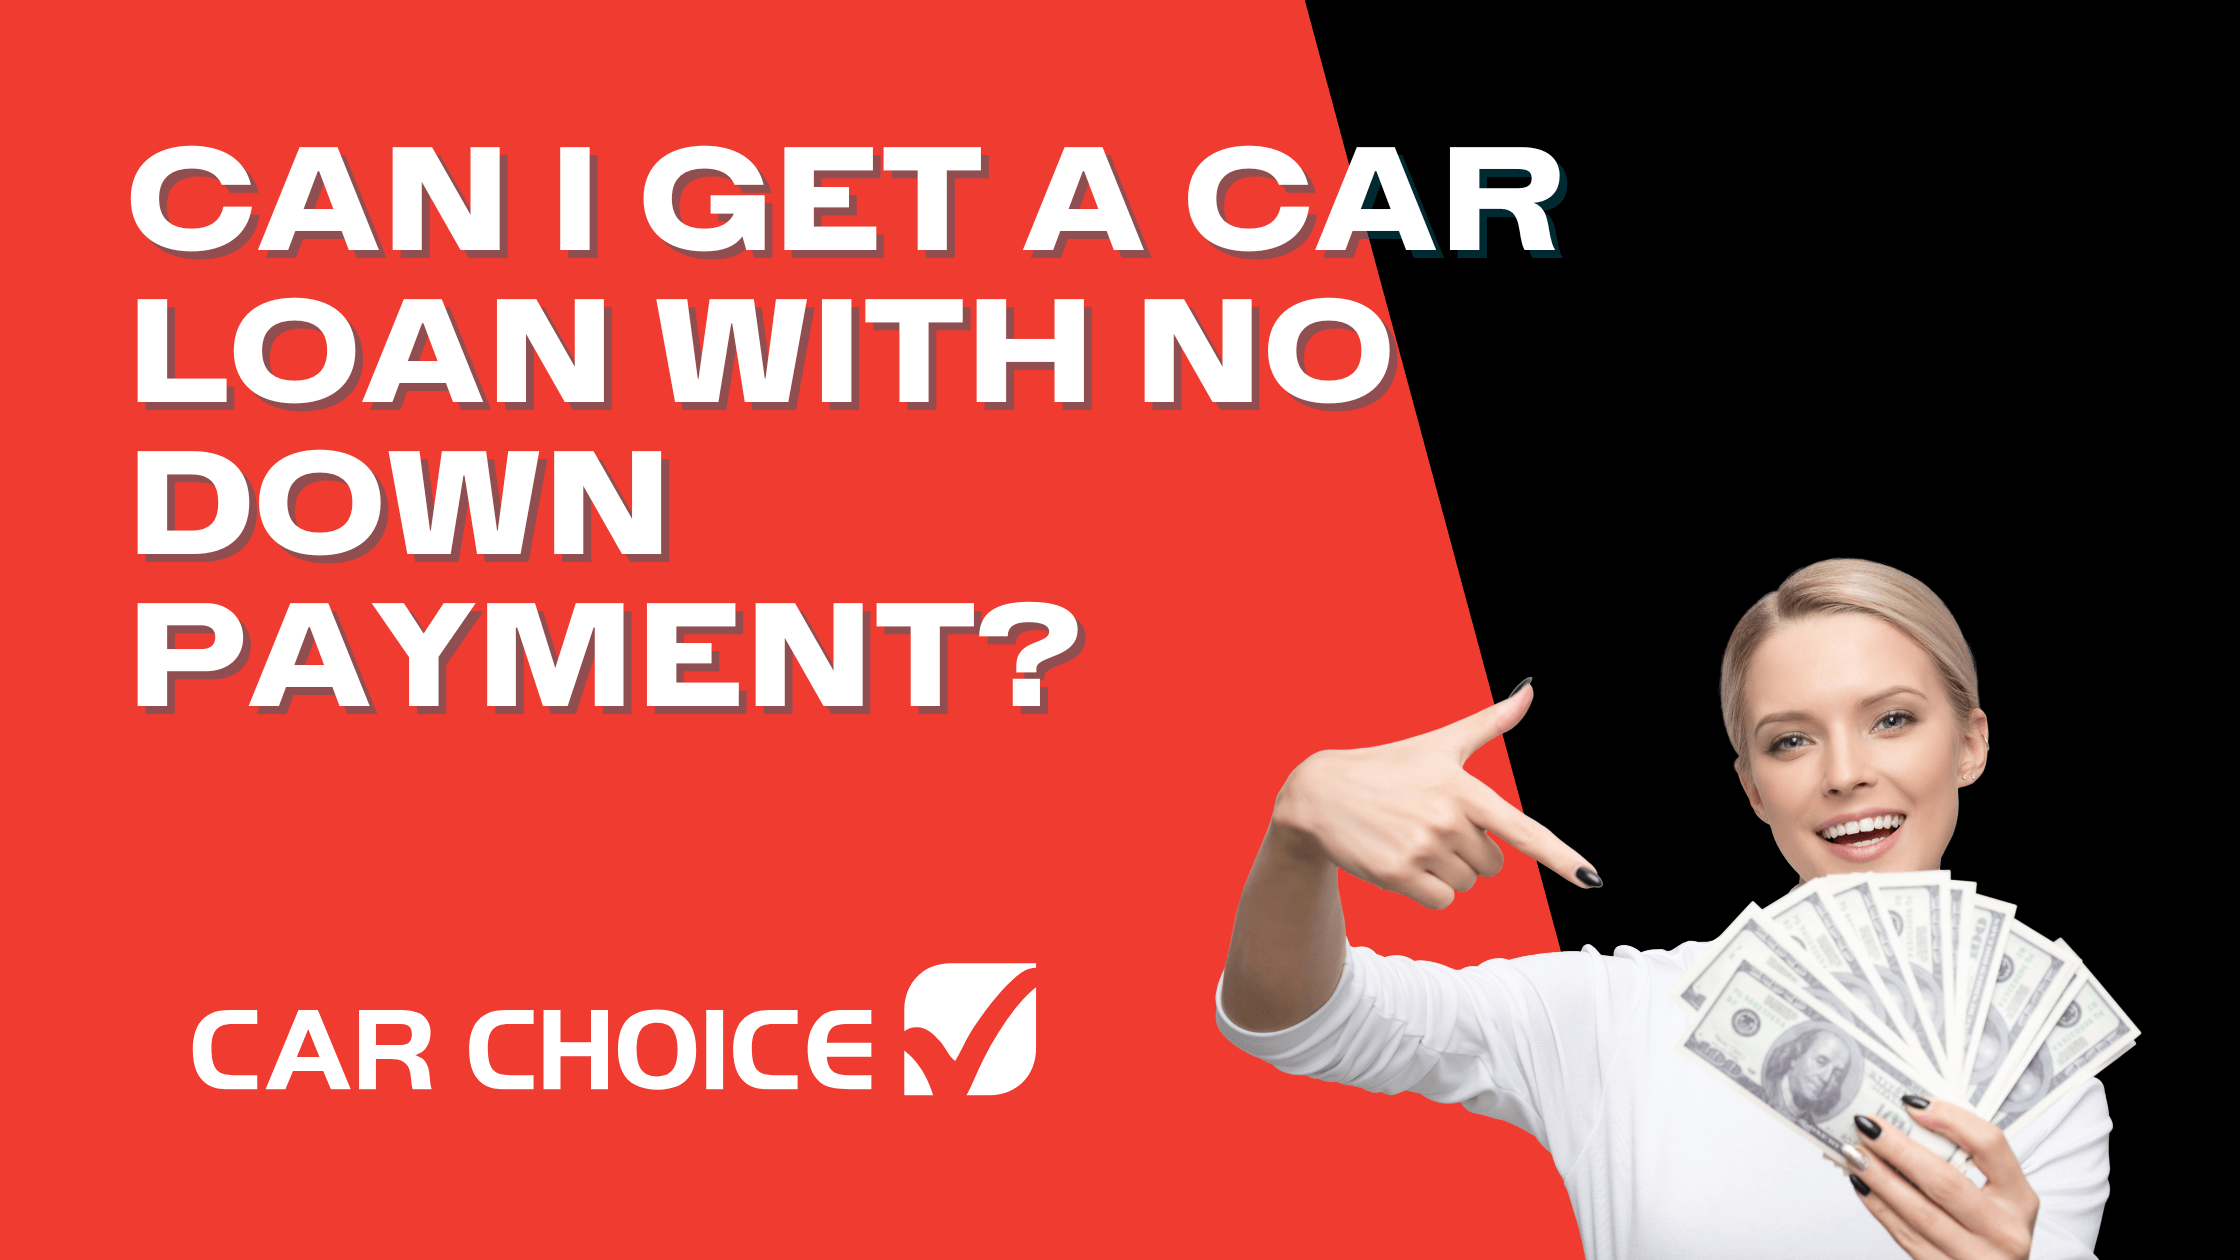 Can I Get a Car Loan with No Down Payment?